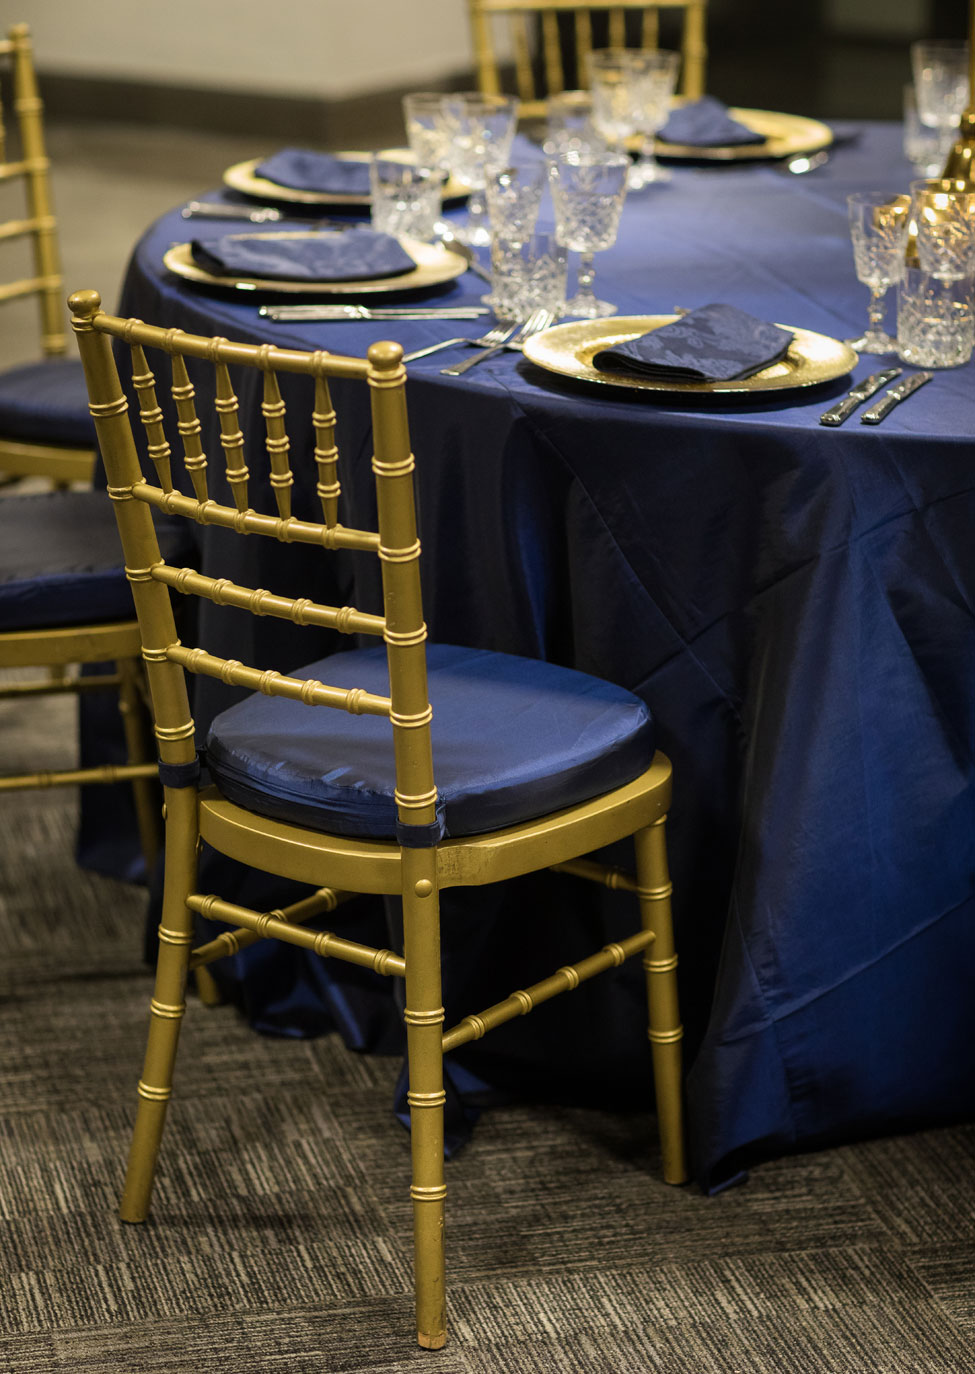 Styling featuring Midnight Blue Taffeta table linen, Gold Starburst charger plates paired with French Navy Vintage Damask napkins, Cut Crystal glasses, Gold Candelabra and Gold Chiavari Chairs with Midnight Blue Taffeta seat pads